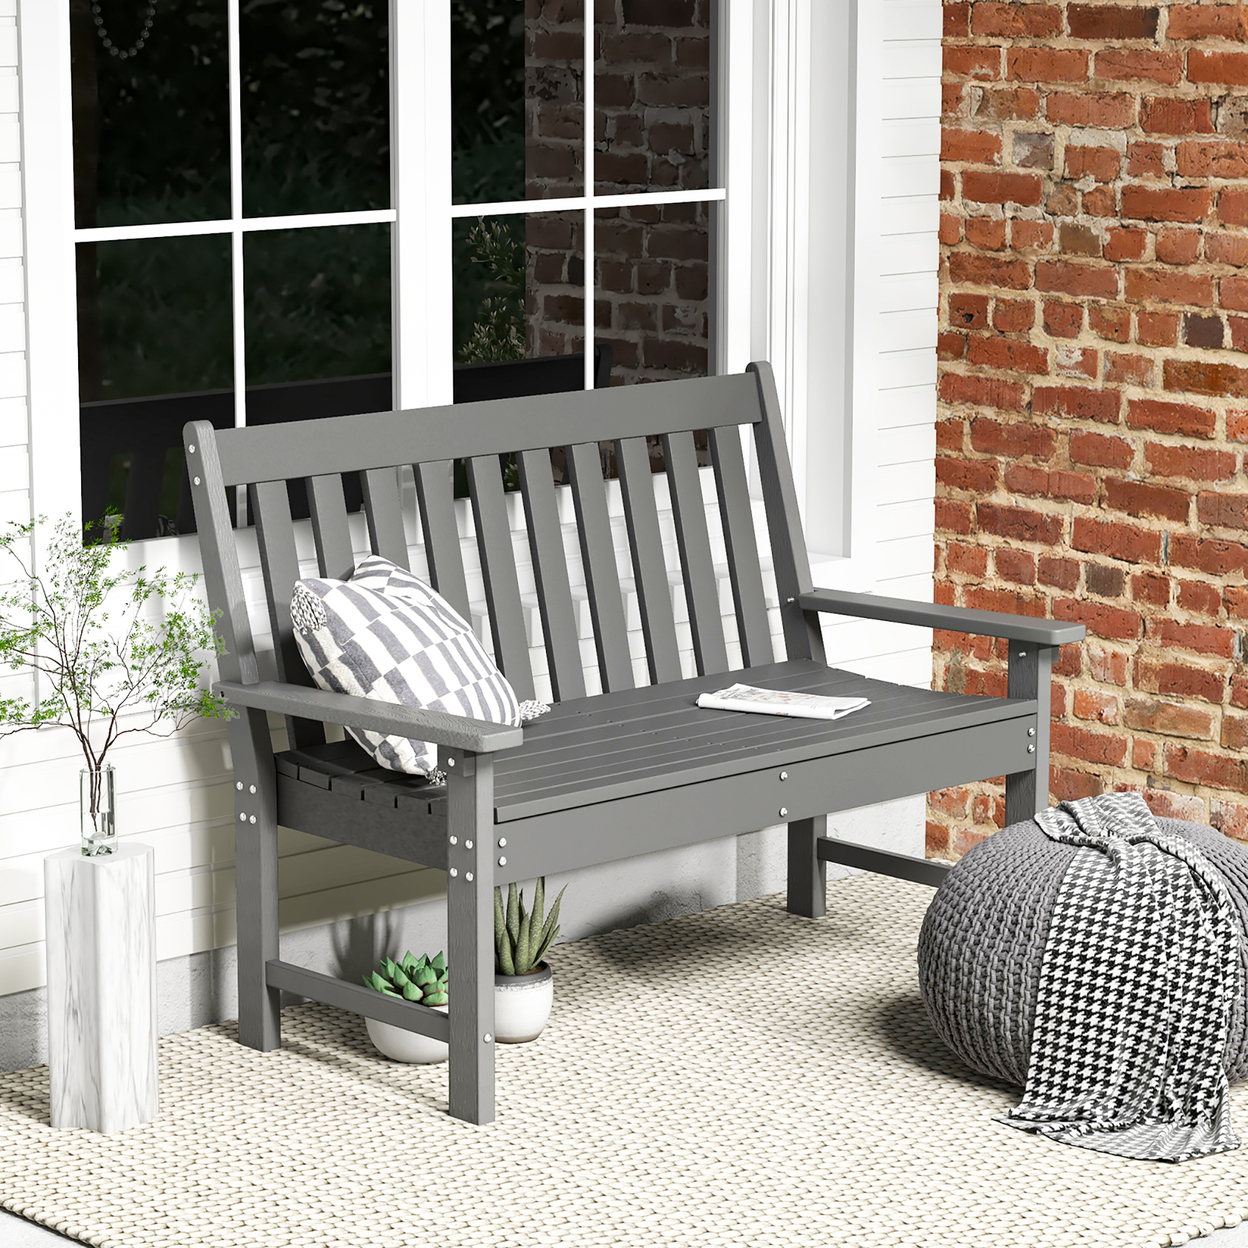 Garden Bench All-Weather HDPE 2-Person Outdoor Bench For Front Porch Backyard